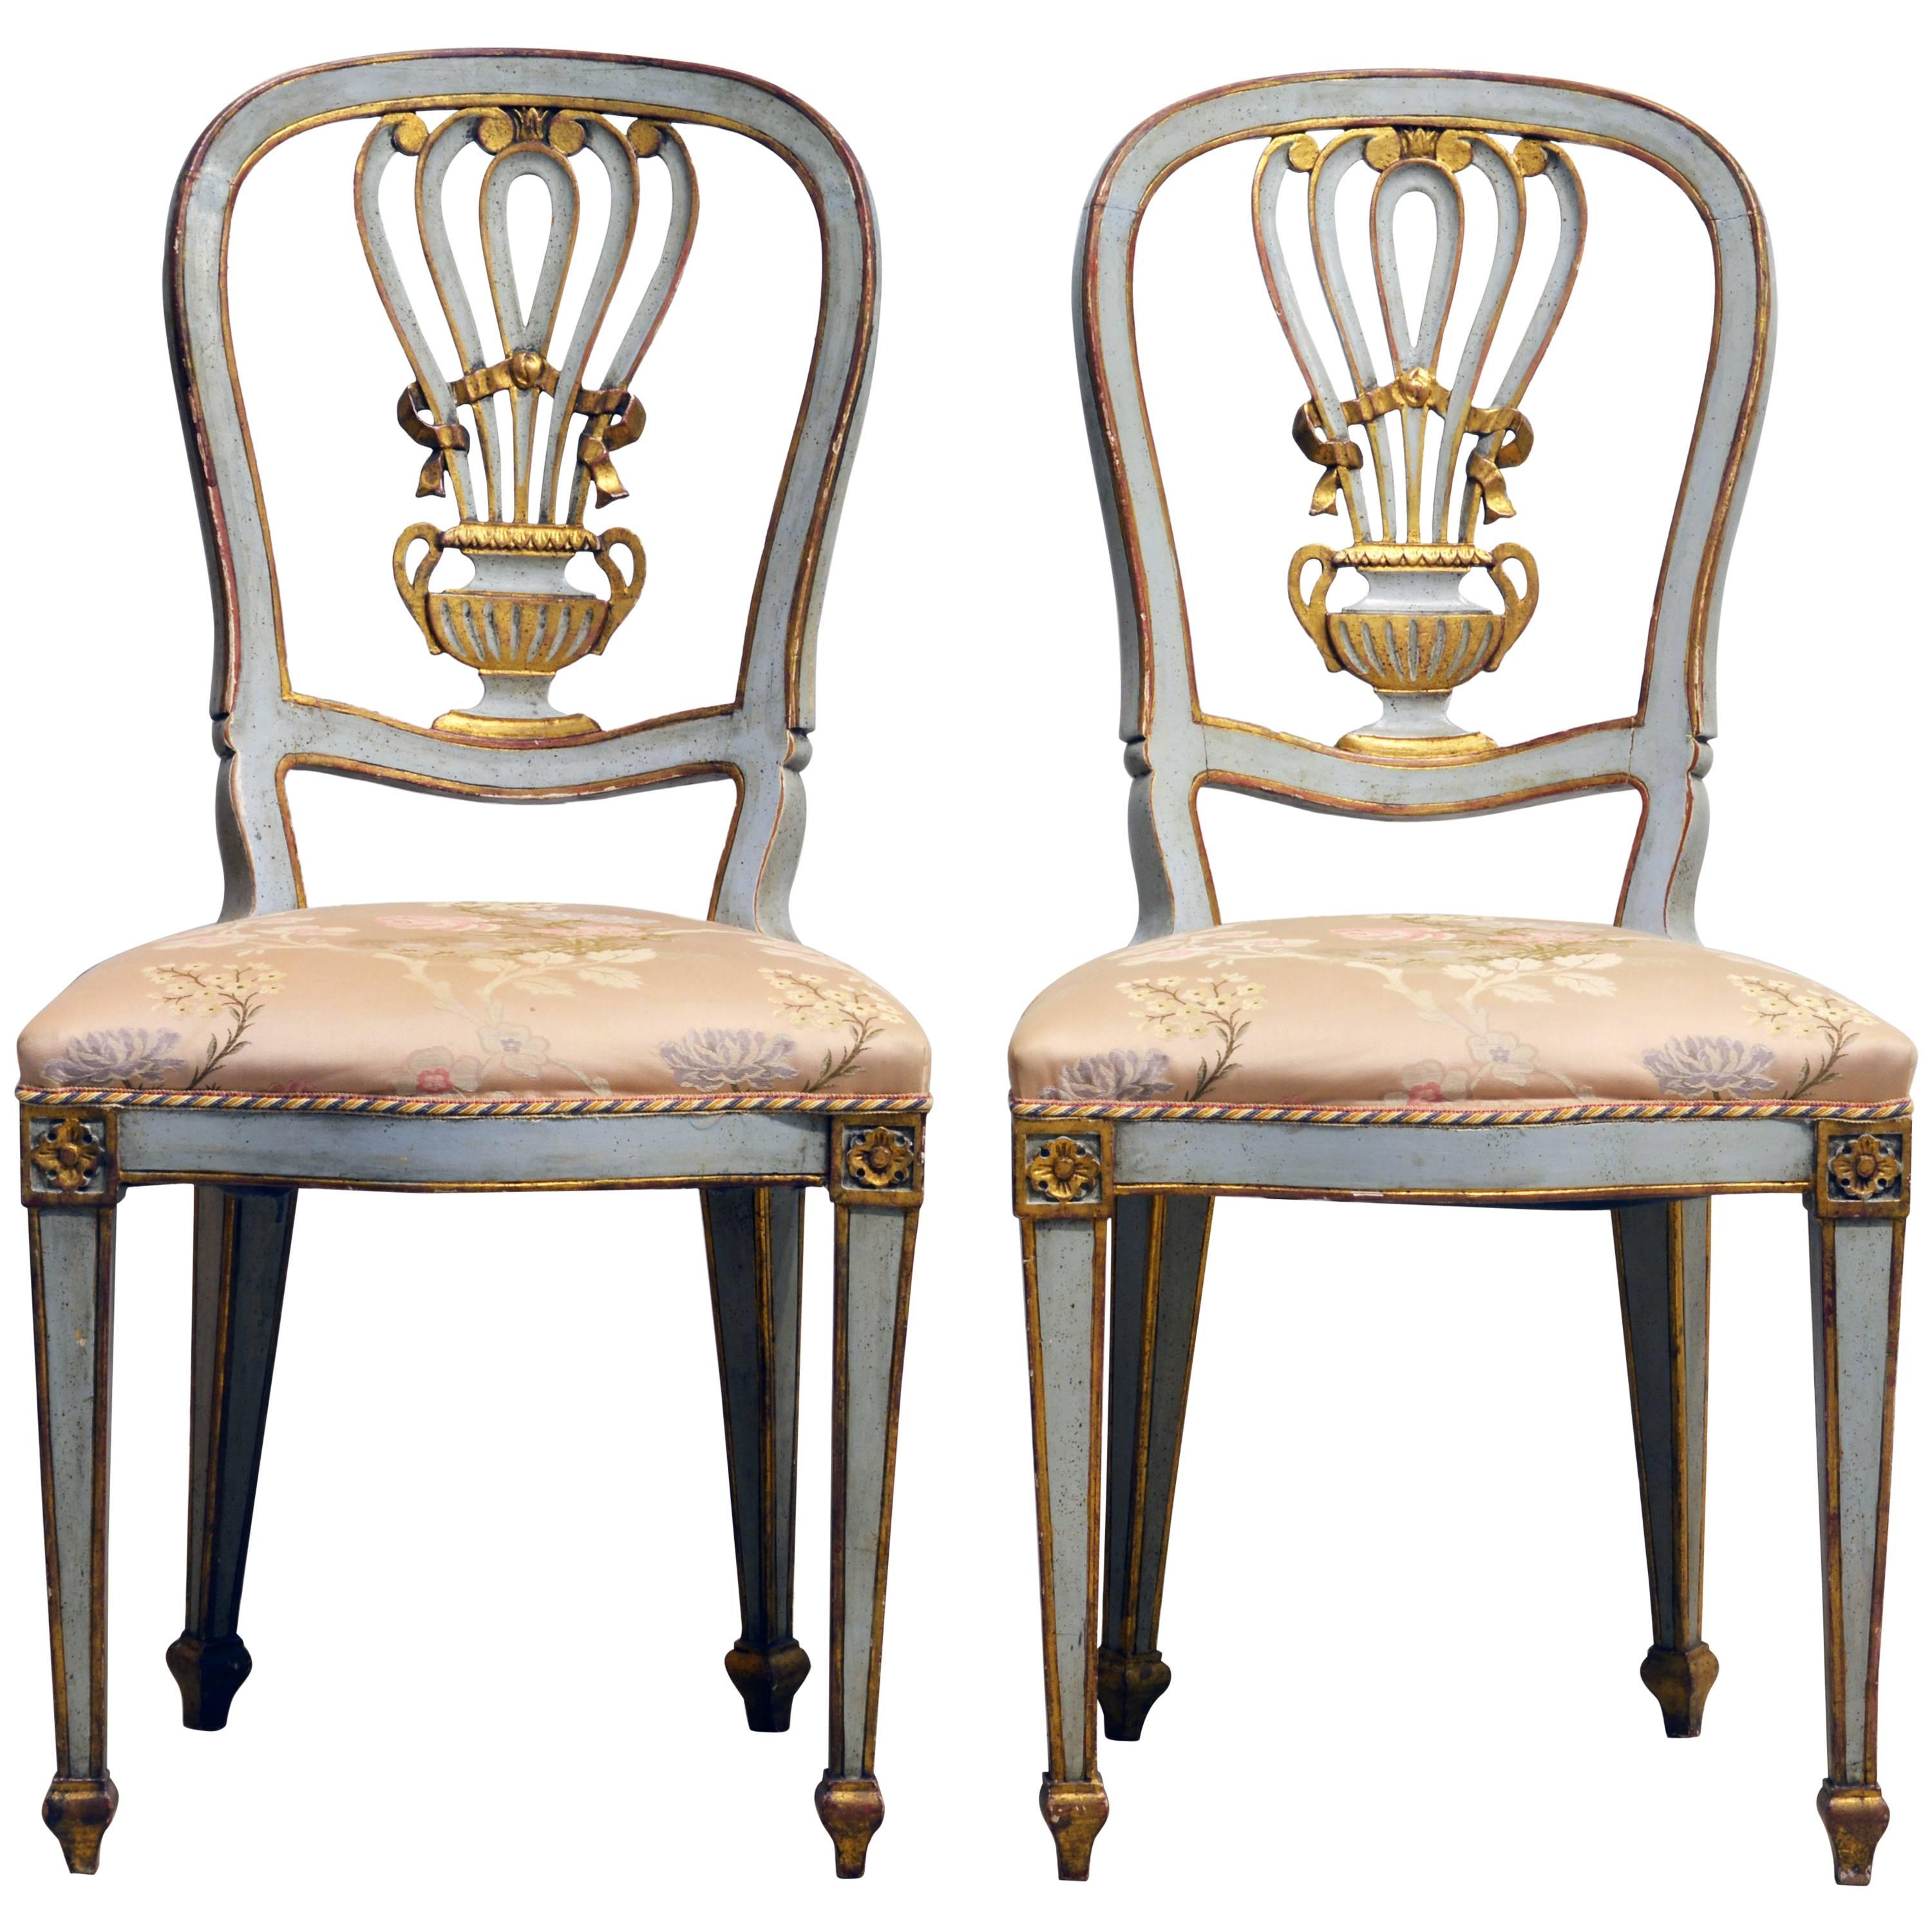 Lovely Pair of Louis XV Inspired Italian Gilt and Grey Paint Salon Chairs